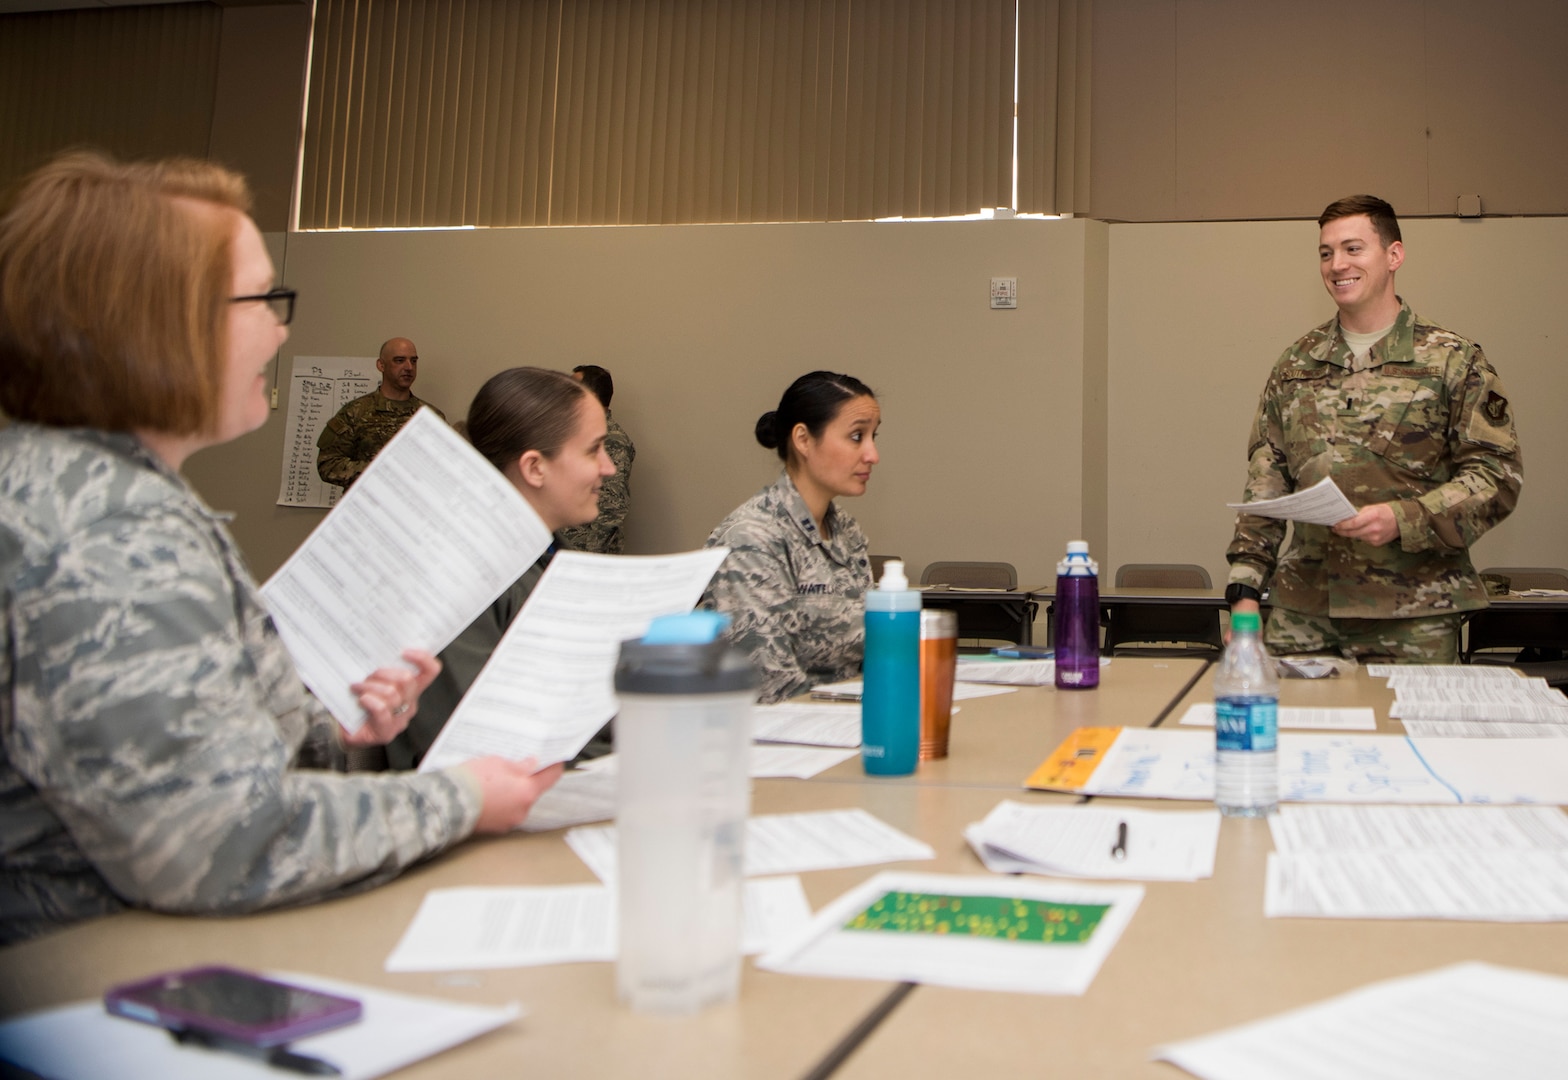 JBER’s First ‘Flight Leaders Course’ Helps Shape Exceptional Leaders